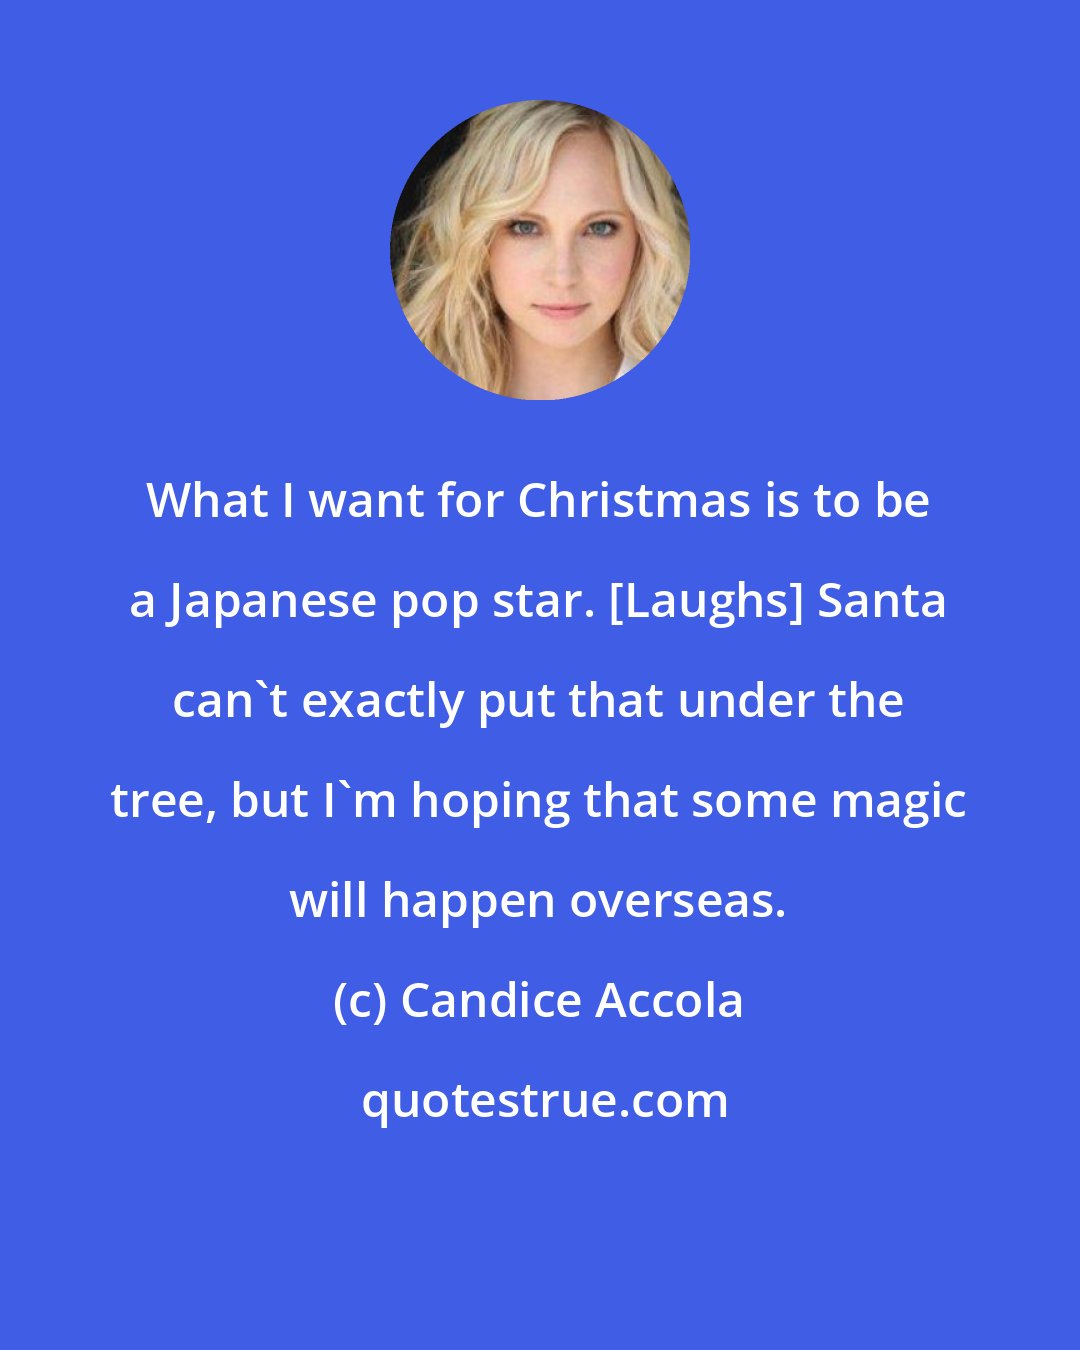 Candice Accola: What I want for Christmas is to be a Japanese pop star. [Laughs] Santa can't exactly put that under the tree, but I'm hoping that some magic will happen overseas.